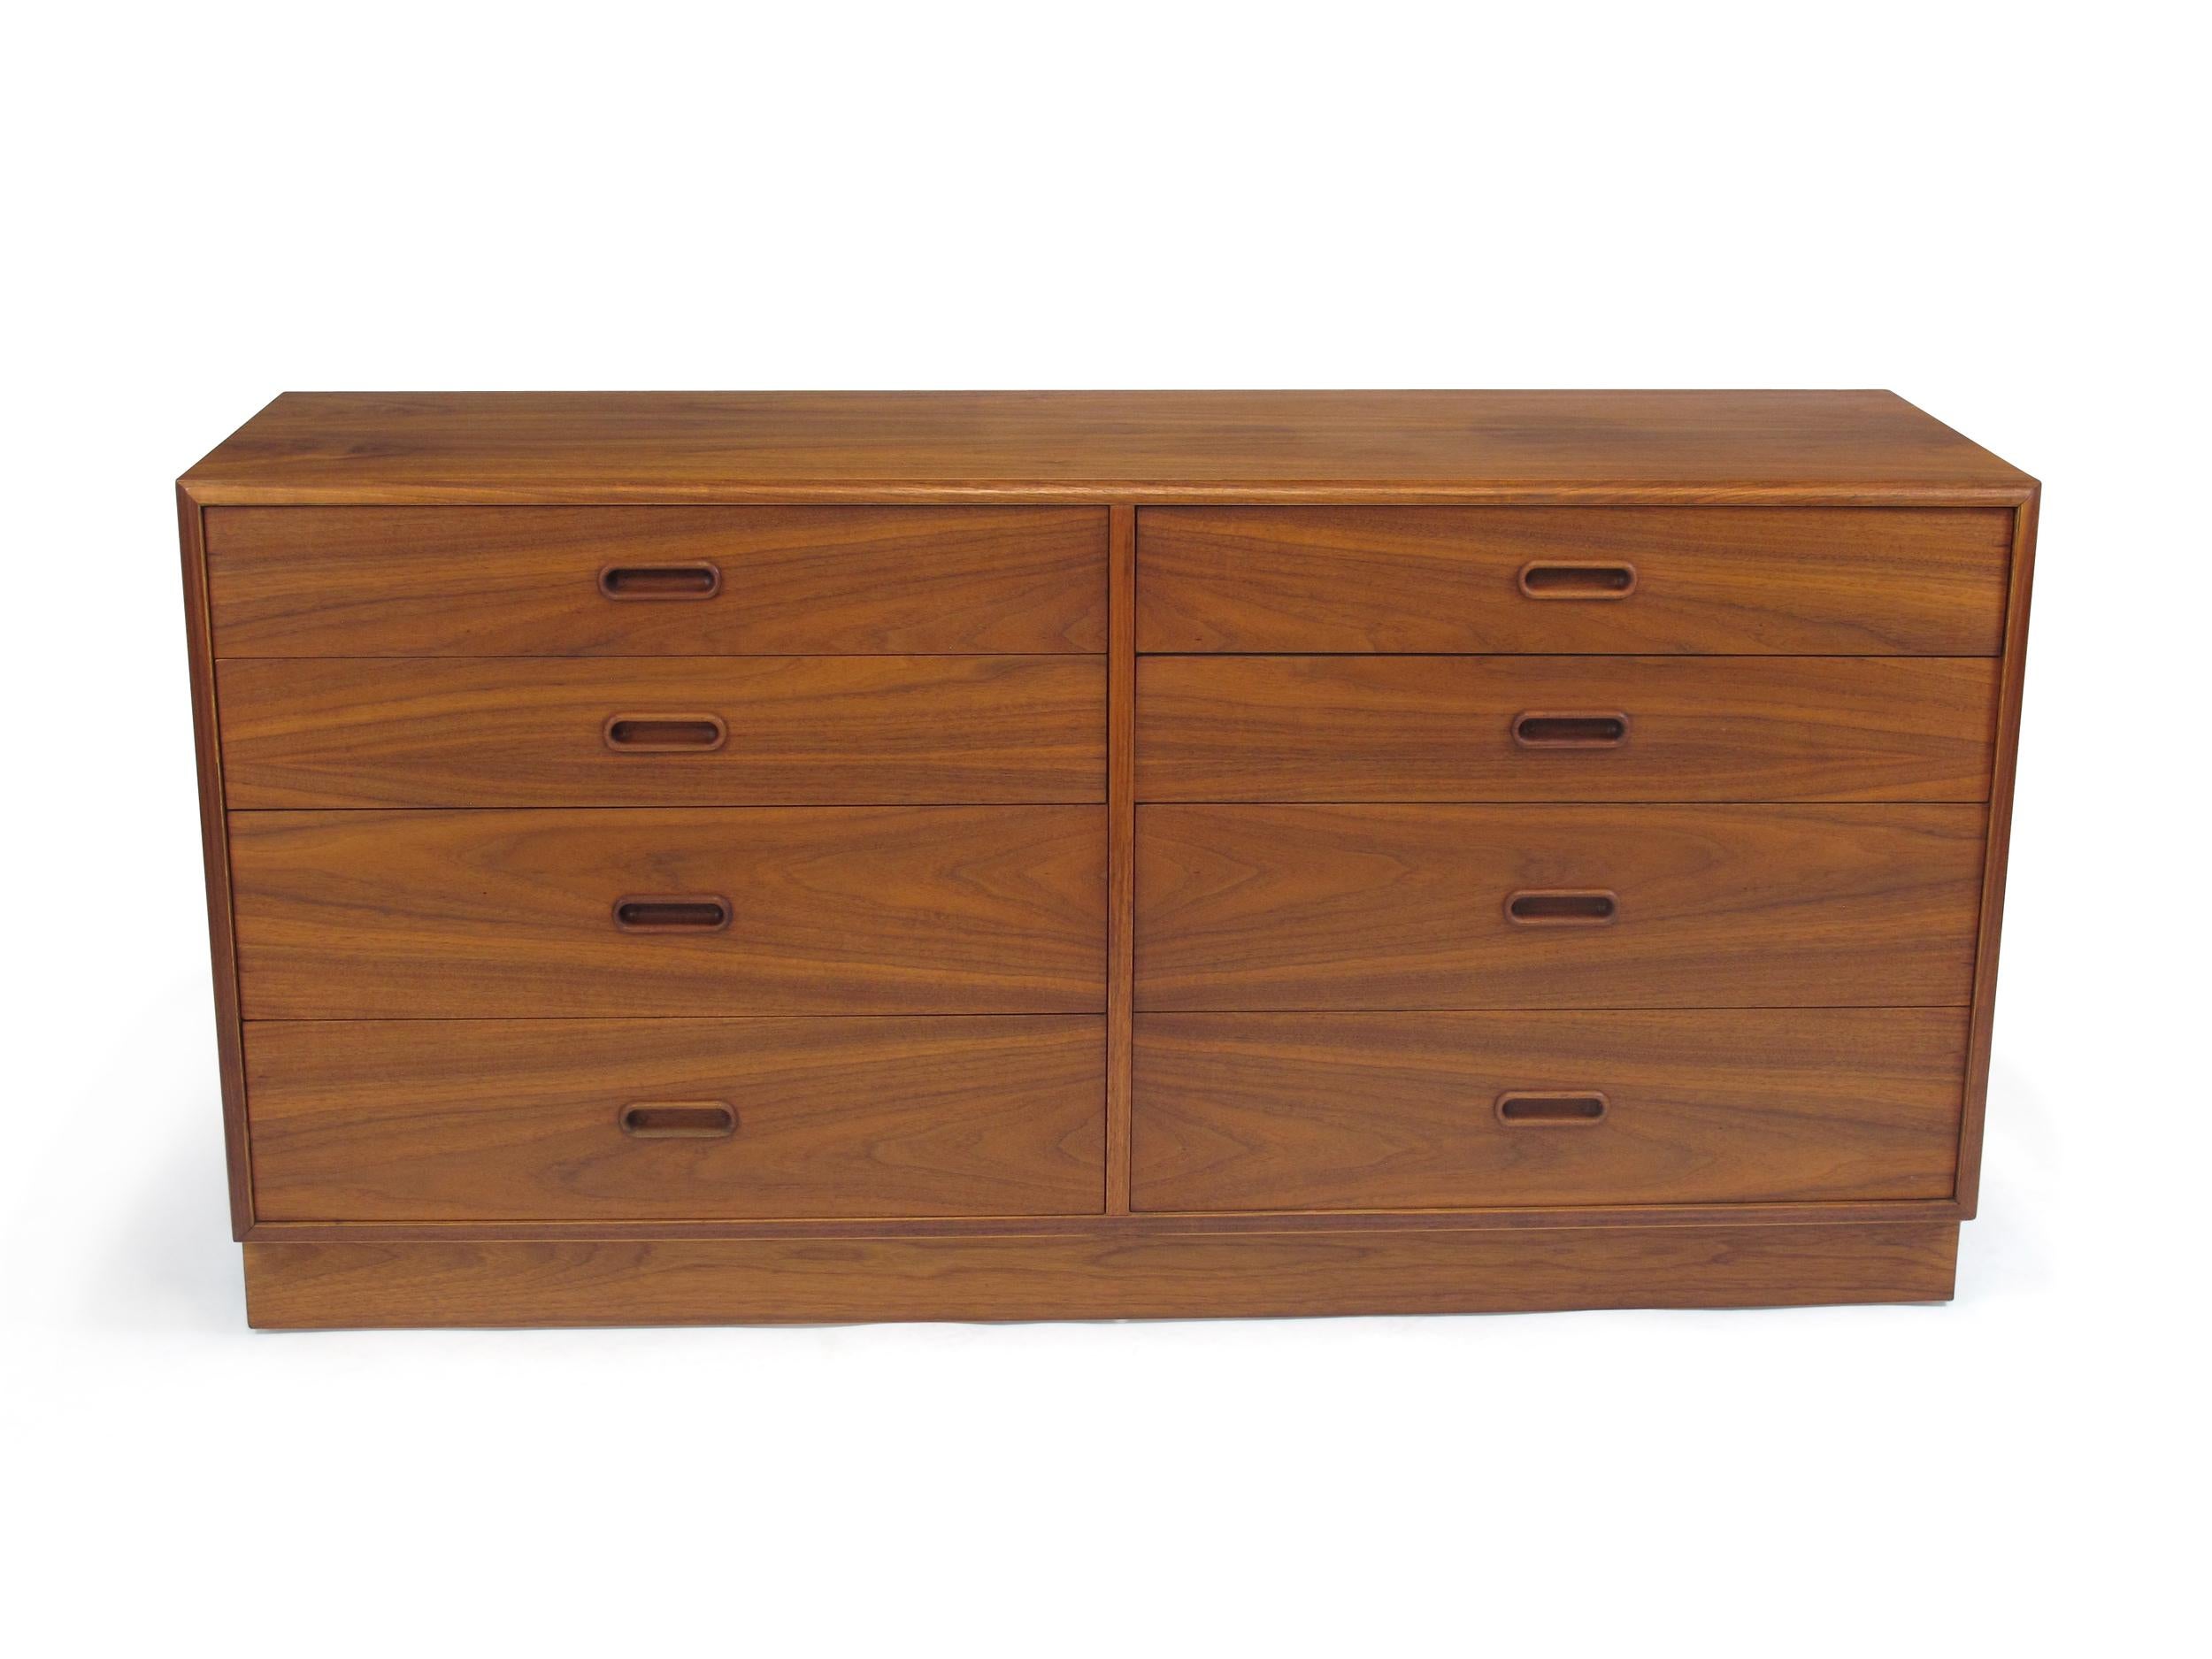 Midcentury walnut eight-drawer dresser crafted of walnut with carved drawer pulls on a plinth base.